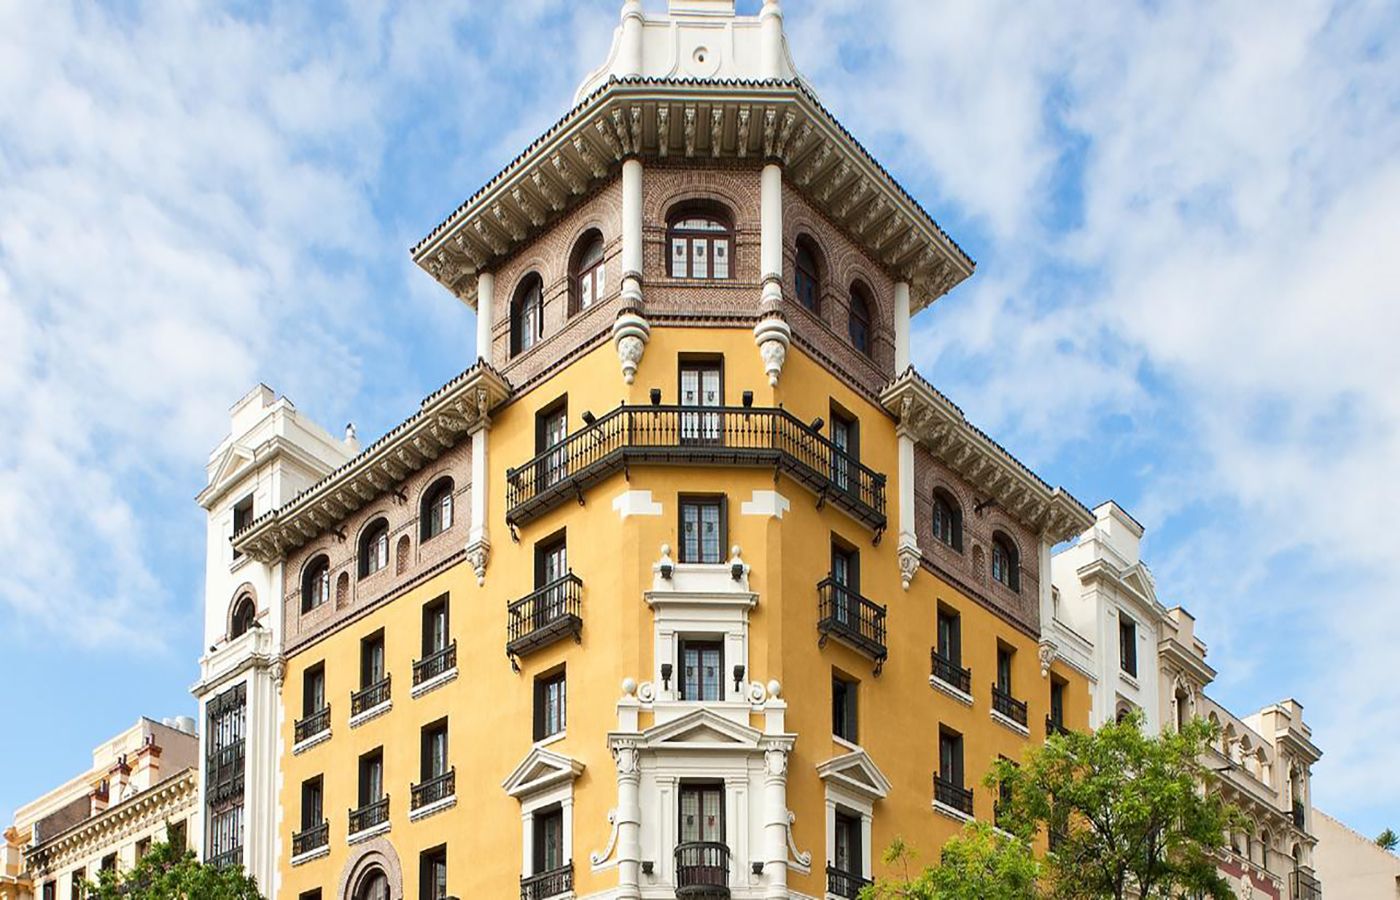 ¡Discover the selection of our favorite 9 Madrid Hotels!